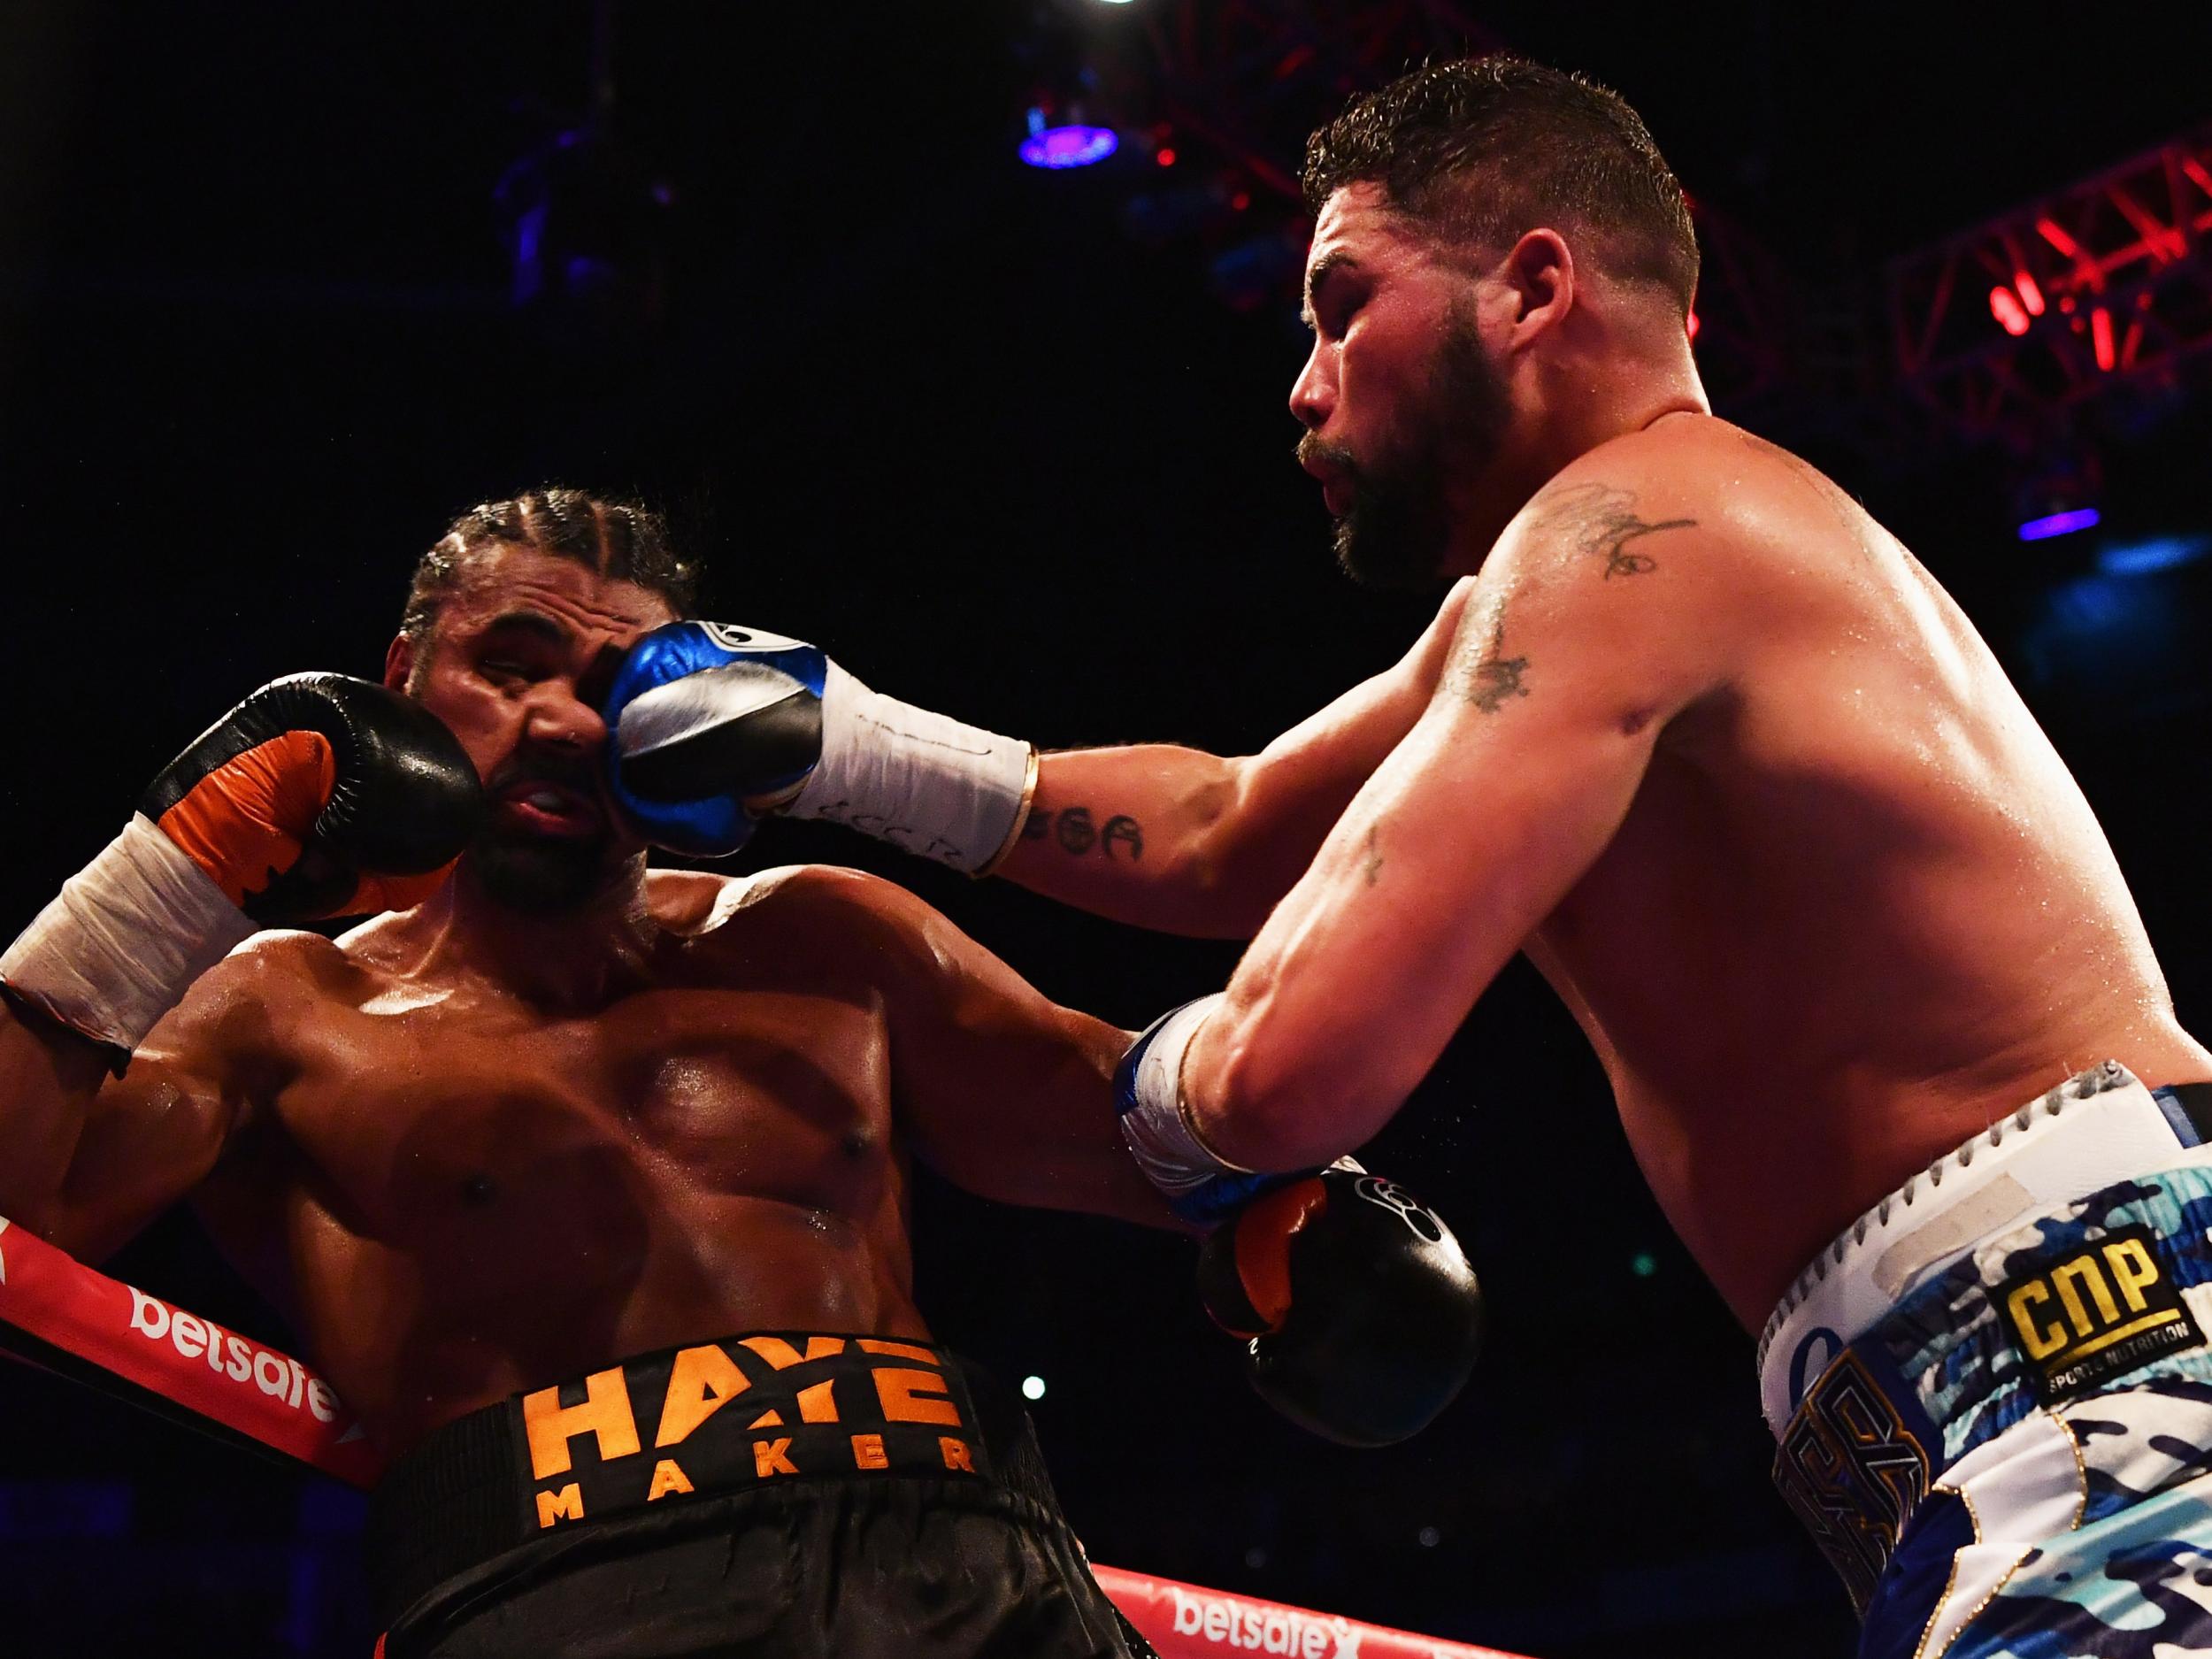 Haye's corner eventually threw in the towel in the 11th round